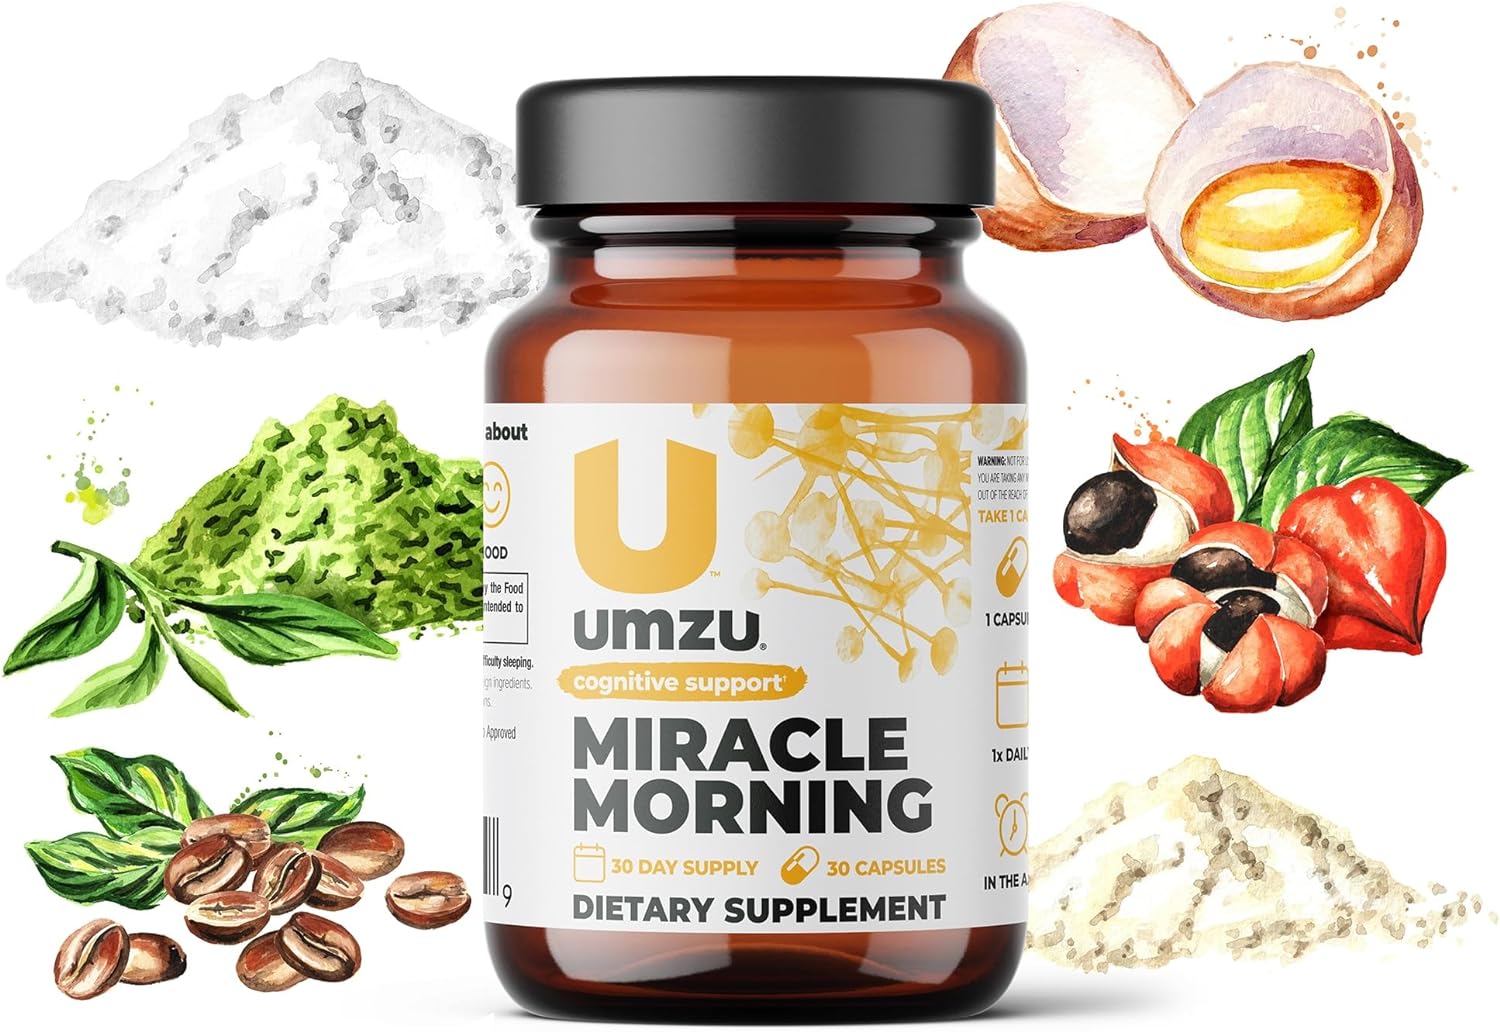 UMZU Miracle Morning - Natural Energy Supplements - with Caffeine, L-Theanine, Thiamin & More - Focus & Energy Pills - 30 Day Supply - 30 Capsules